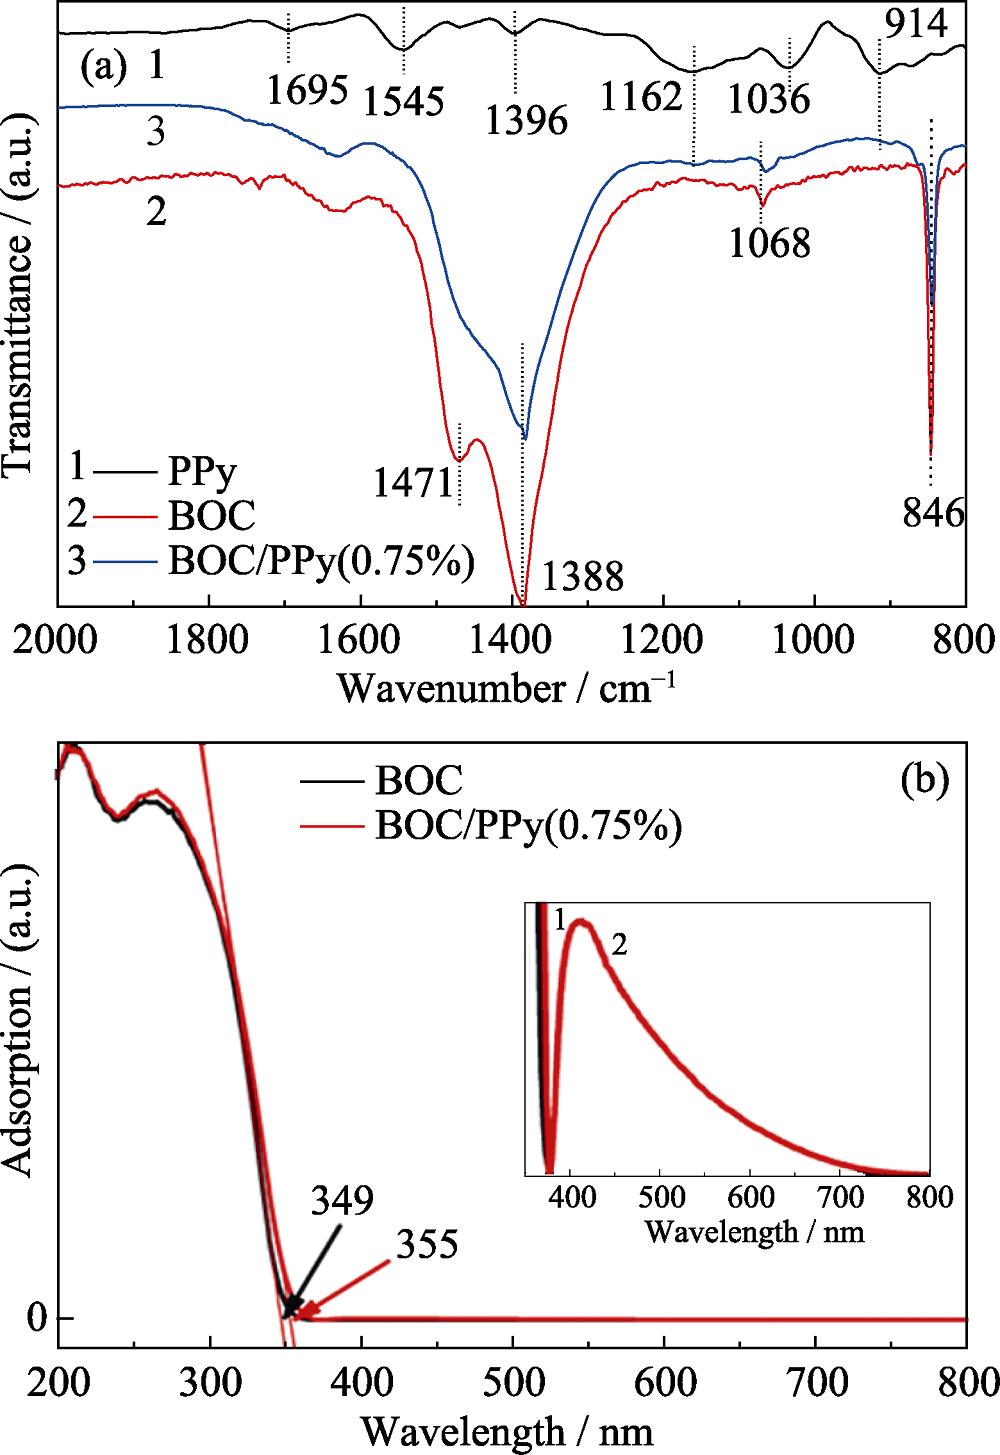 (a) DRIFTS spectra of PPy, BOC and BOC/PPy(0.75%); (b) UV-Vis spectra and of BOC and BOC/PPy(0.75%) with insert showing the enlarged spectra from 350 nm to 800 nm